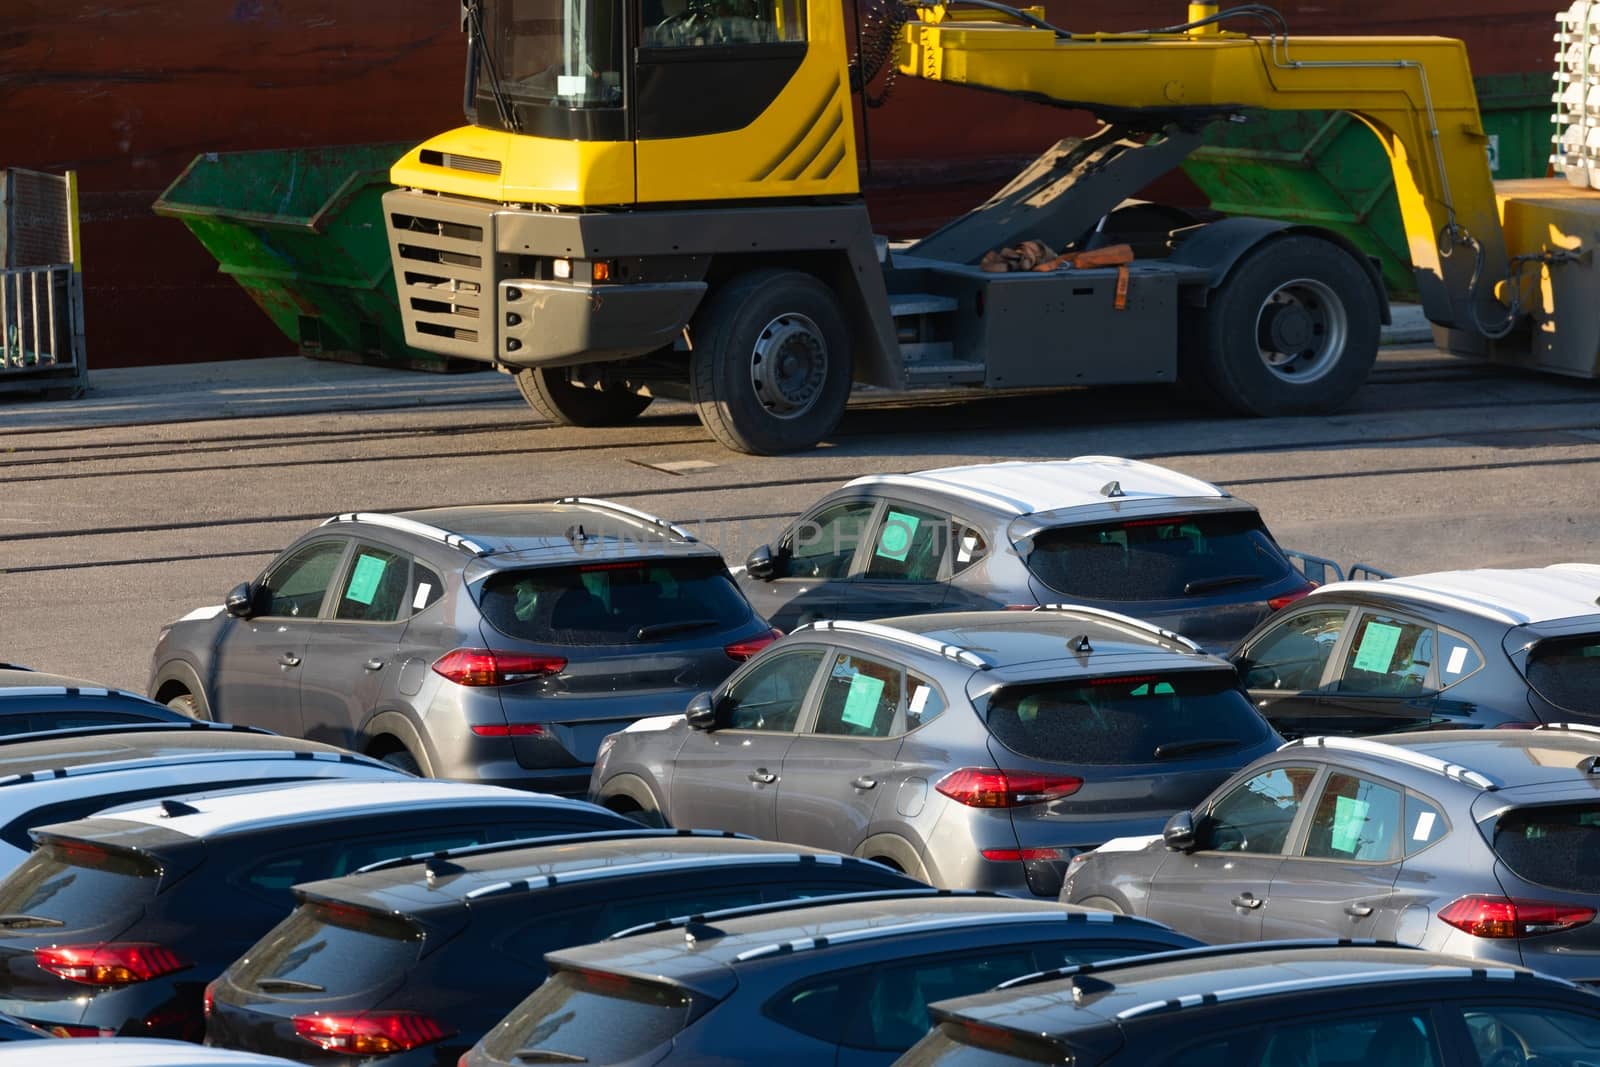 Lot of cars being transported to trade location by svedoliver